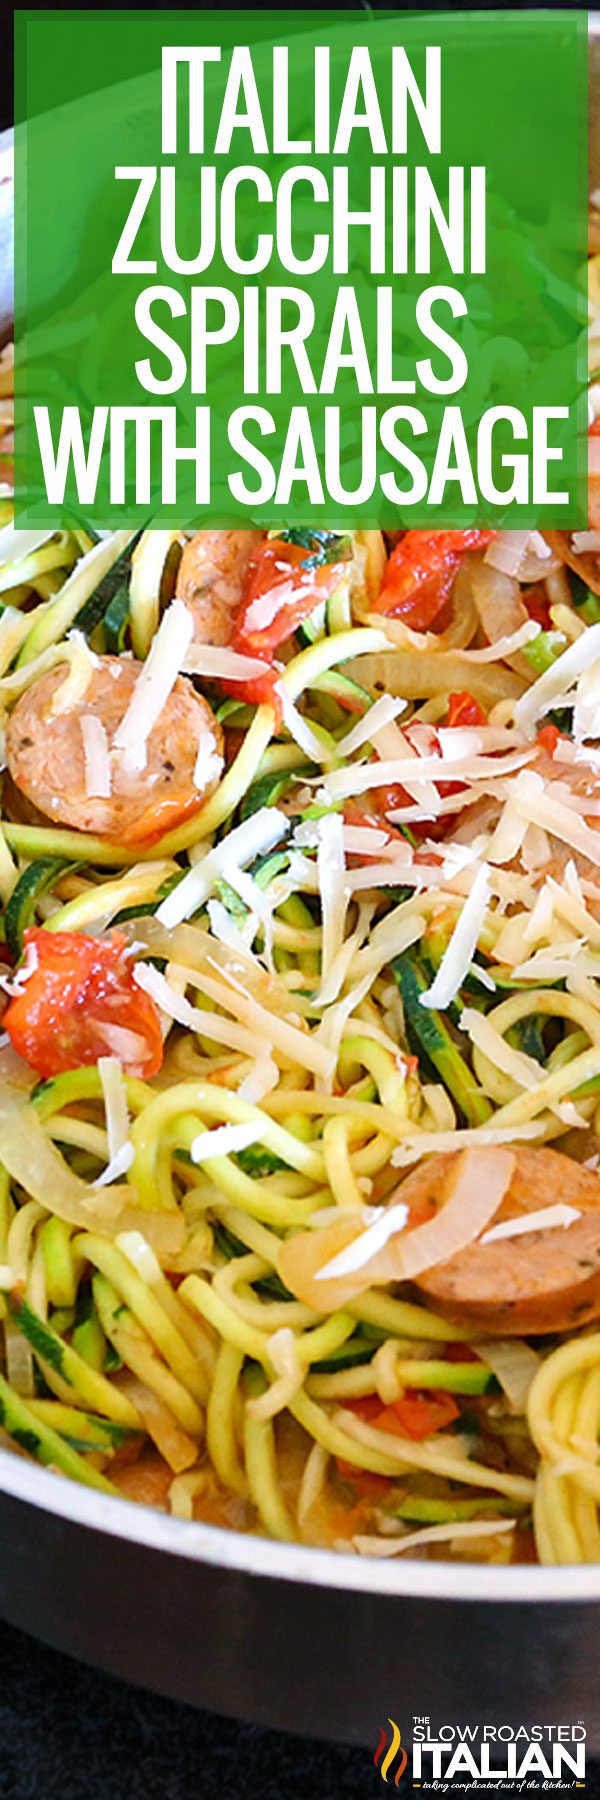 Zucchini Noodles with Sausage + Video - The Slow Roasted Italian